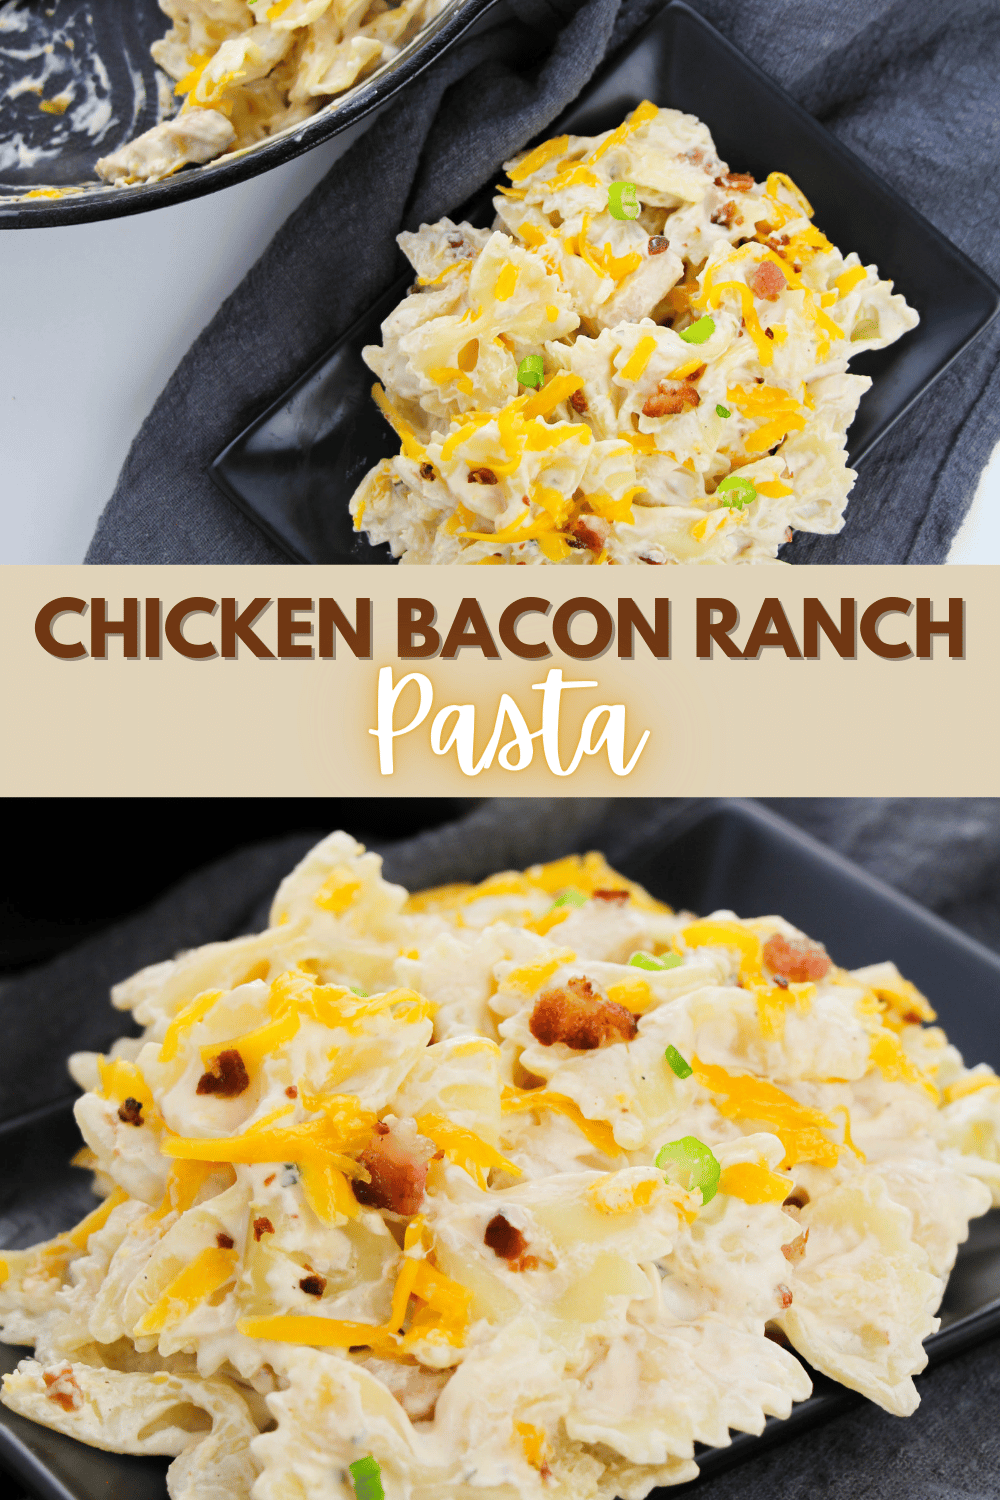 This Chicken Bacon Ranch Pasta is an easy and delicious recipe that can be made in no time at all with only a little bit of effort. #chickenbaconranchpasta #chicken #bacon #ranch #pasta via @wondermomwannab